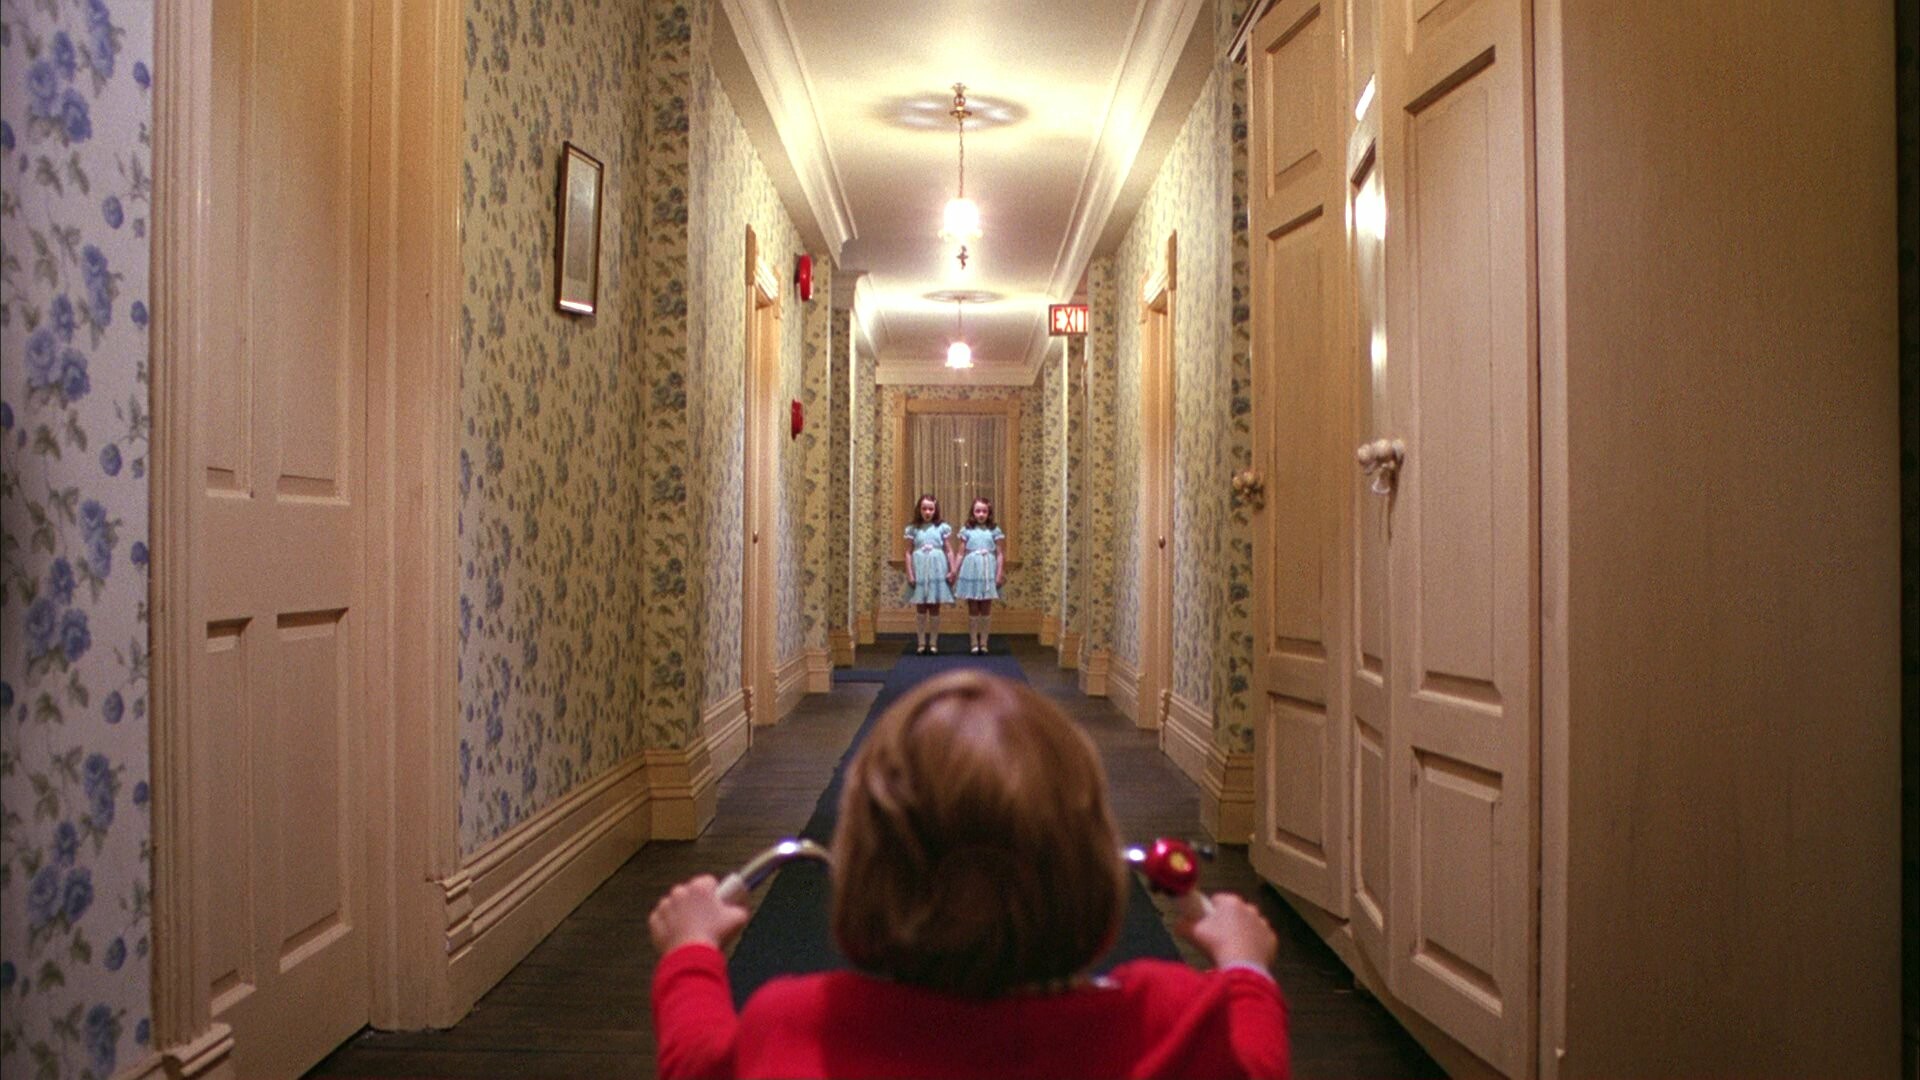 The Shining: Horror, Thriller, Movie, Classic film, Come play with us, Danny. 1920x1080 Full HD Wallpaper.